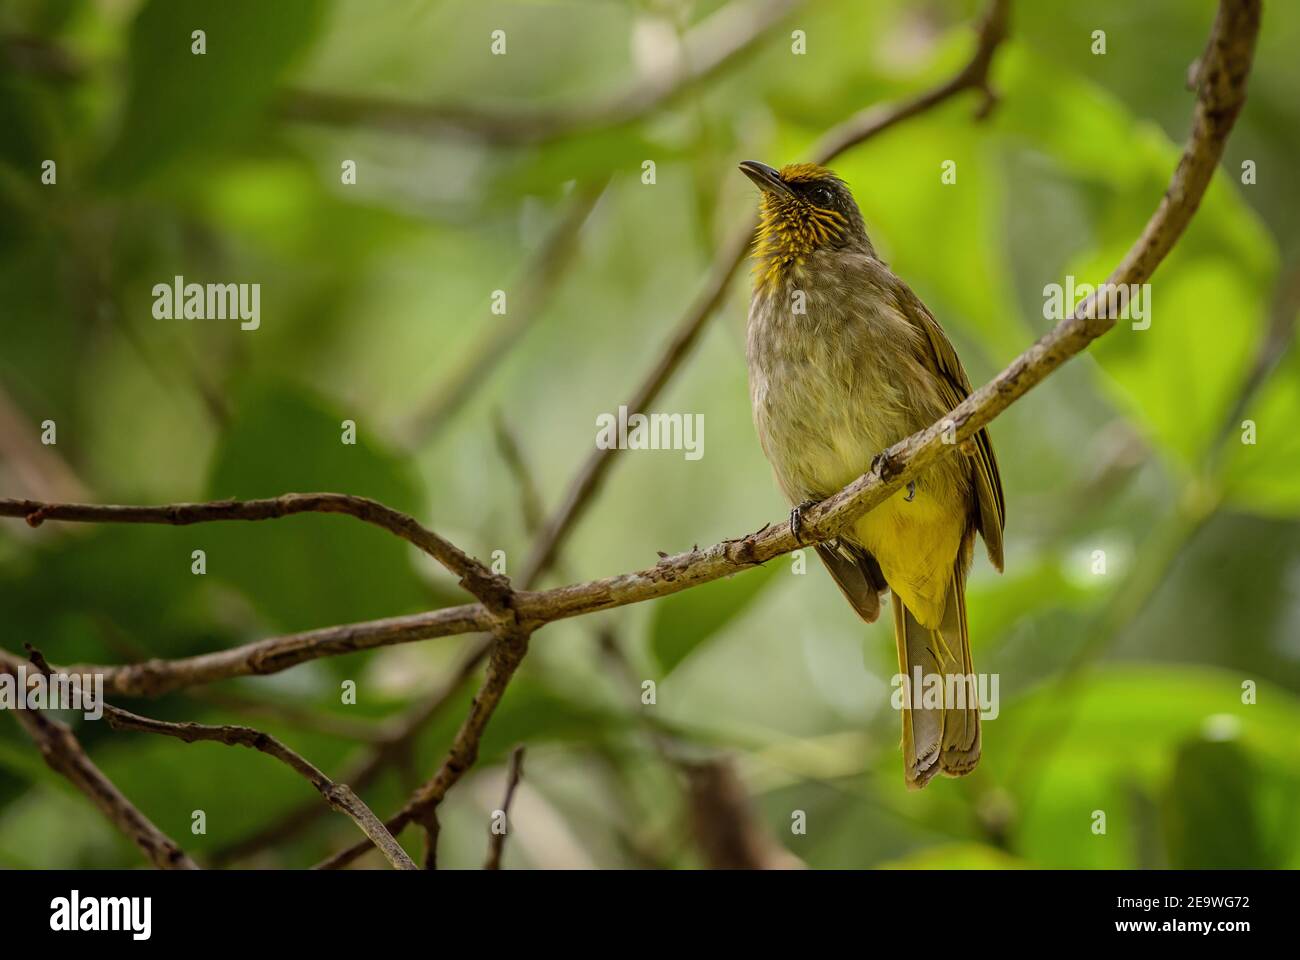 Stripe-throated Bulbul - Pycnonotus finlaysoni, beautiful shy perching bird from Asian forests and woodlands, Thailand. Stock Photo